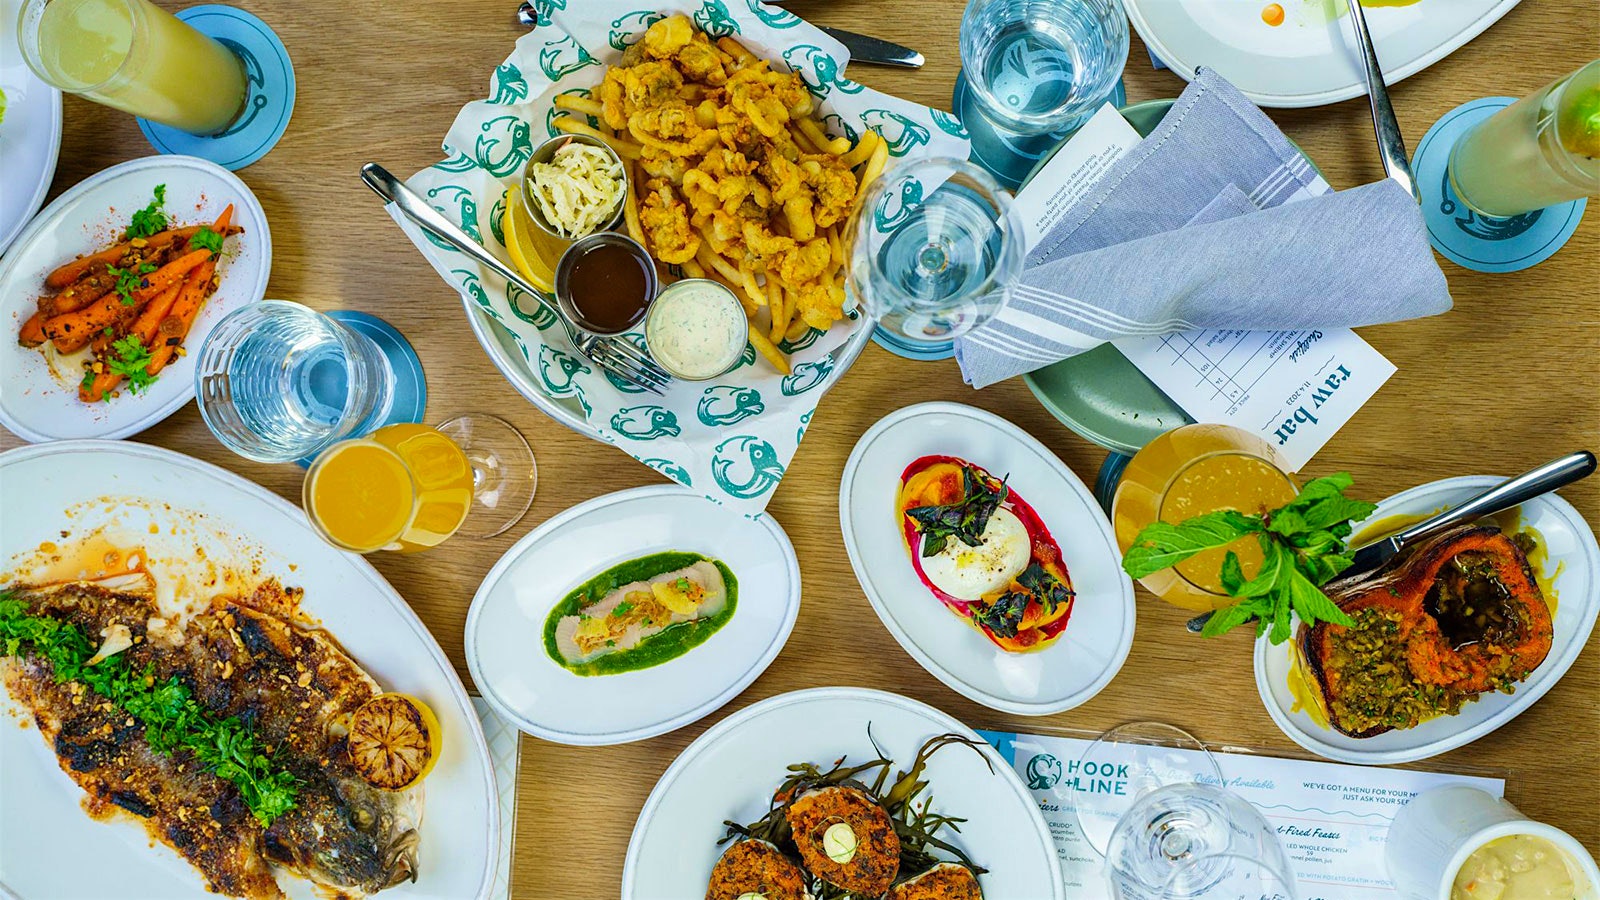  A table of fried calamari, grilled fish and baked clams